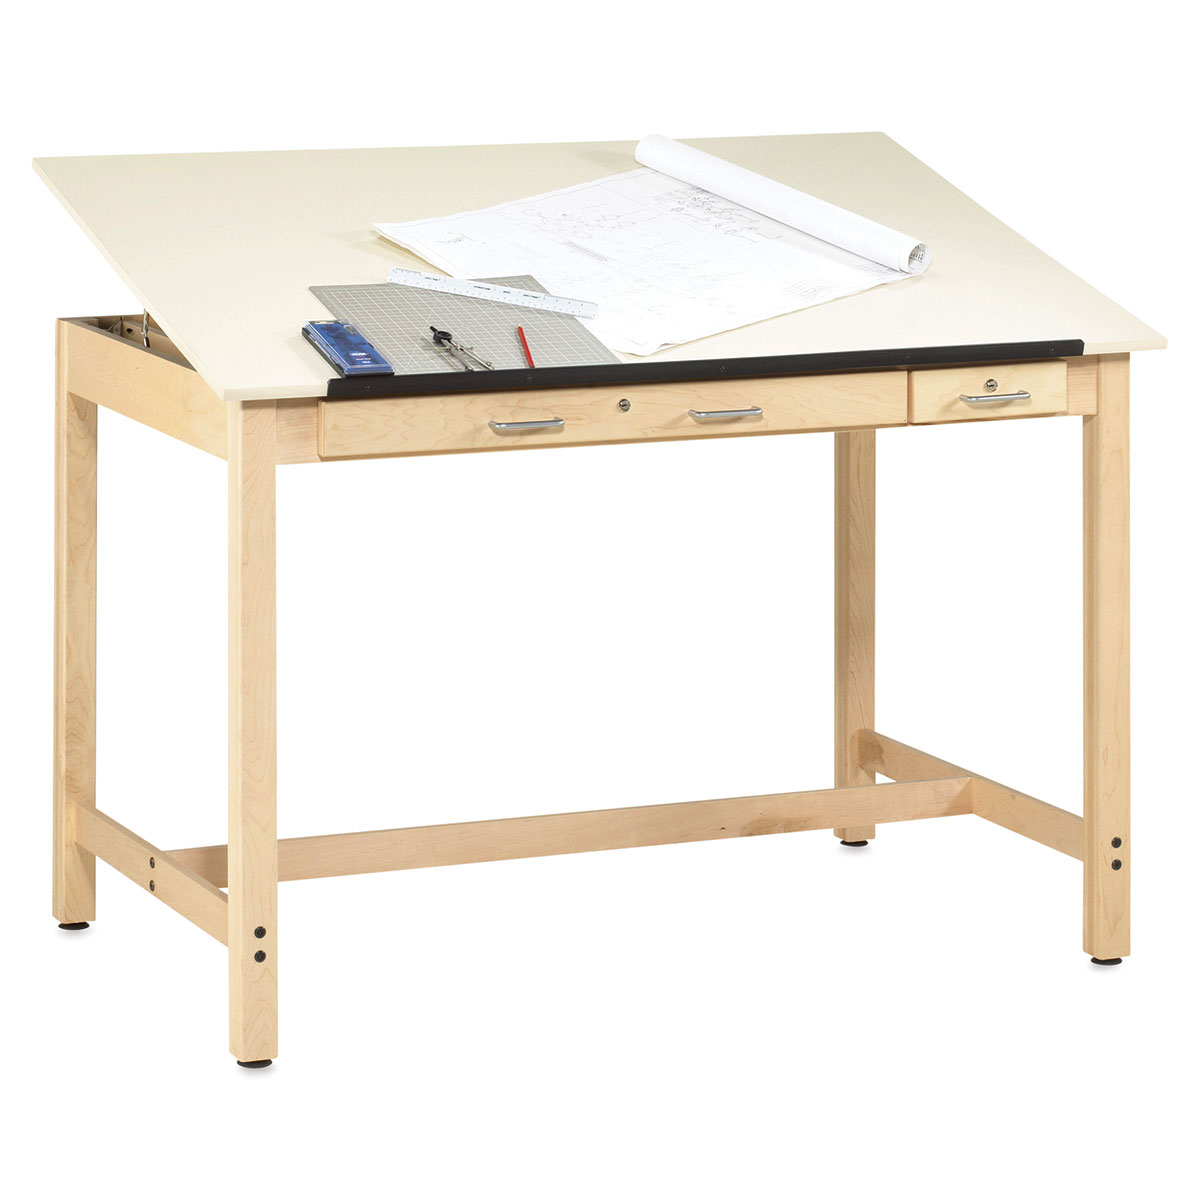 Diversified Spaces Instructor Drafting Tables BLICK Art Materials